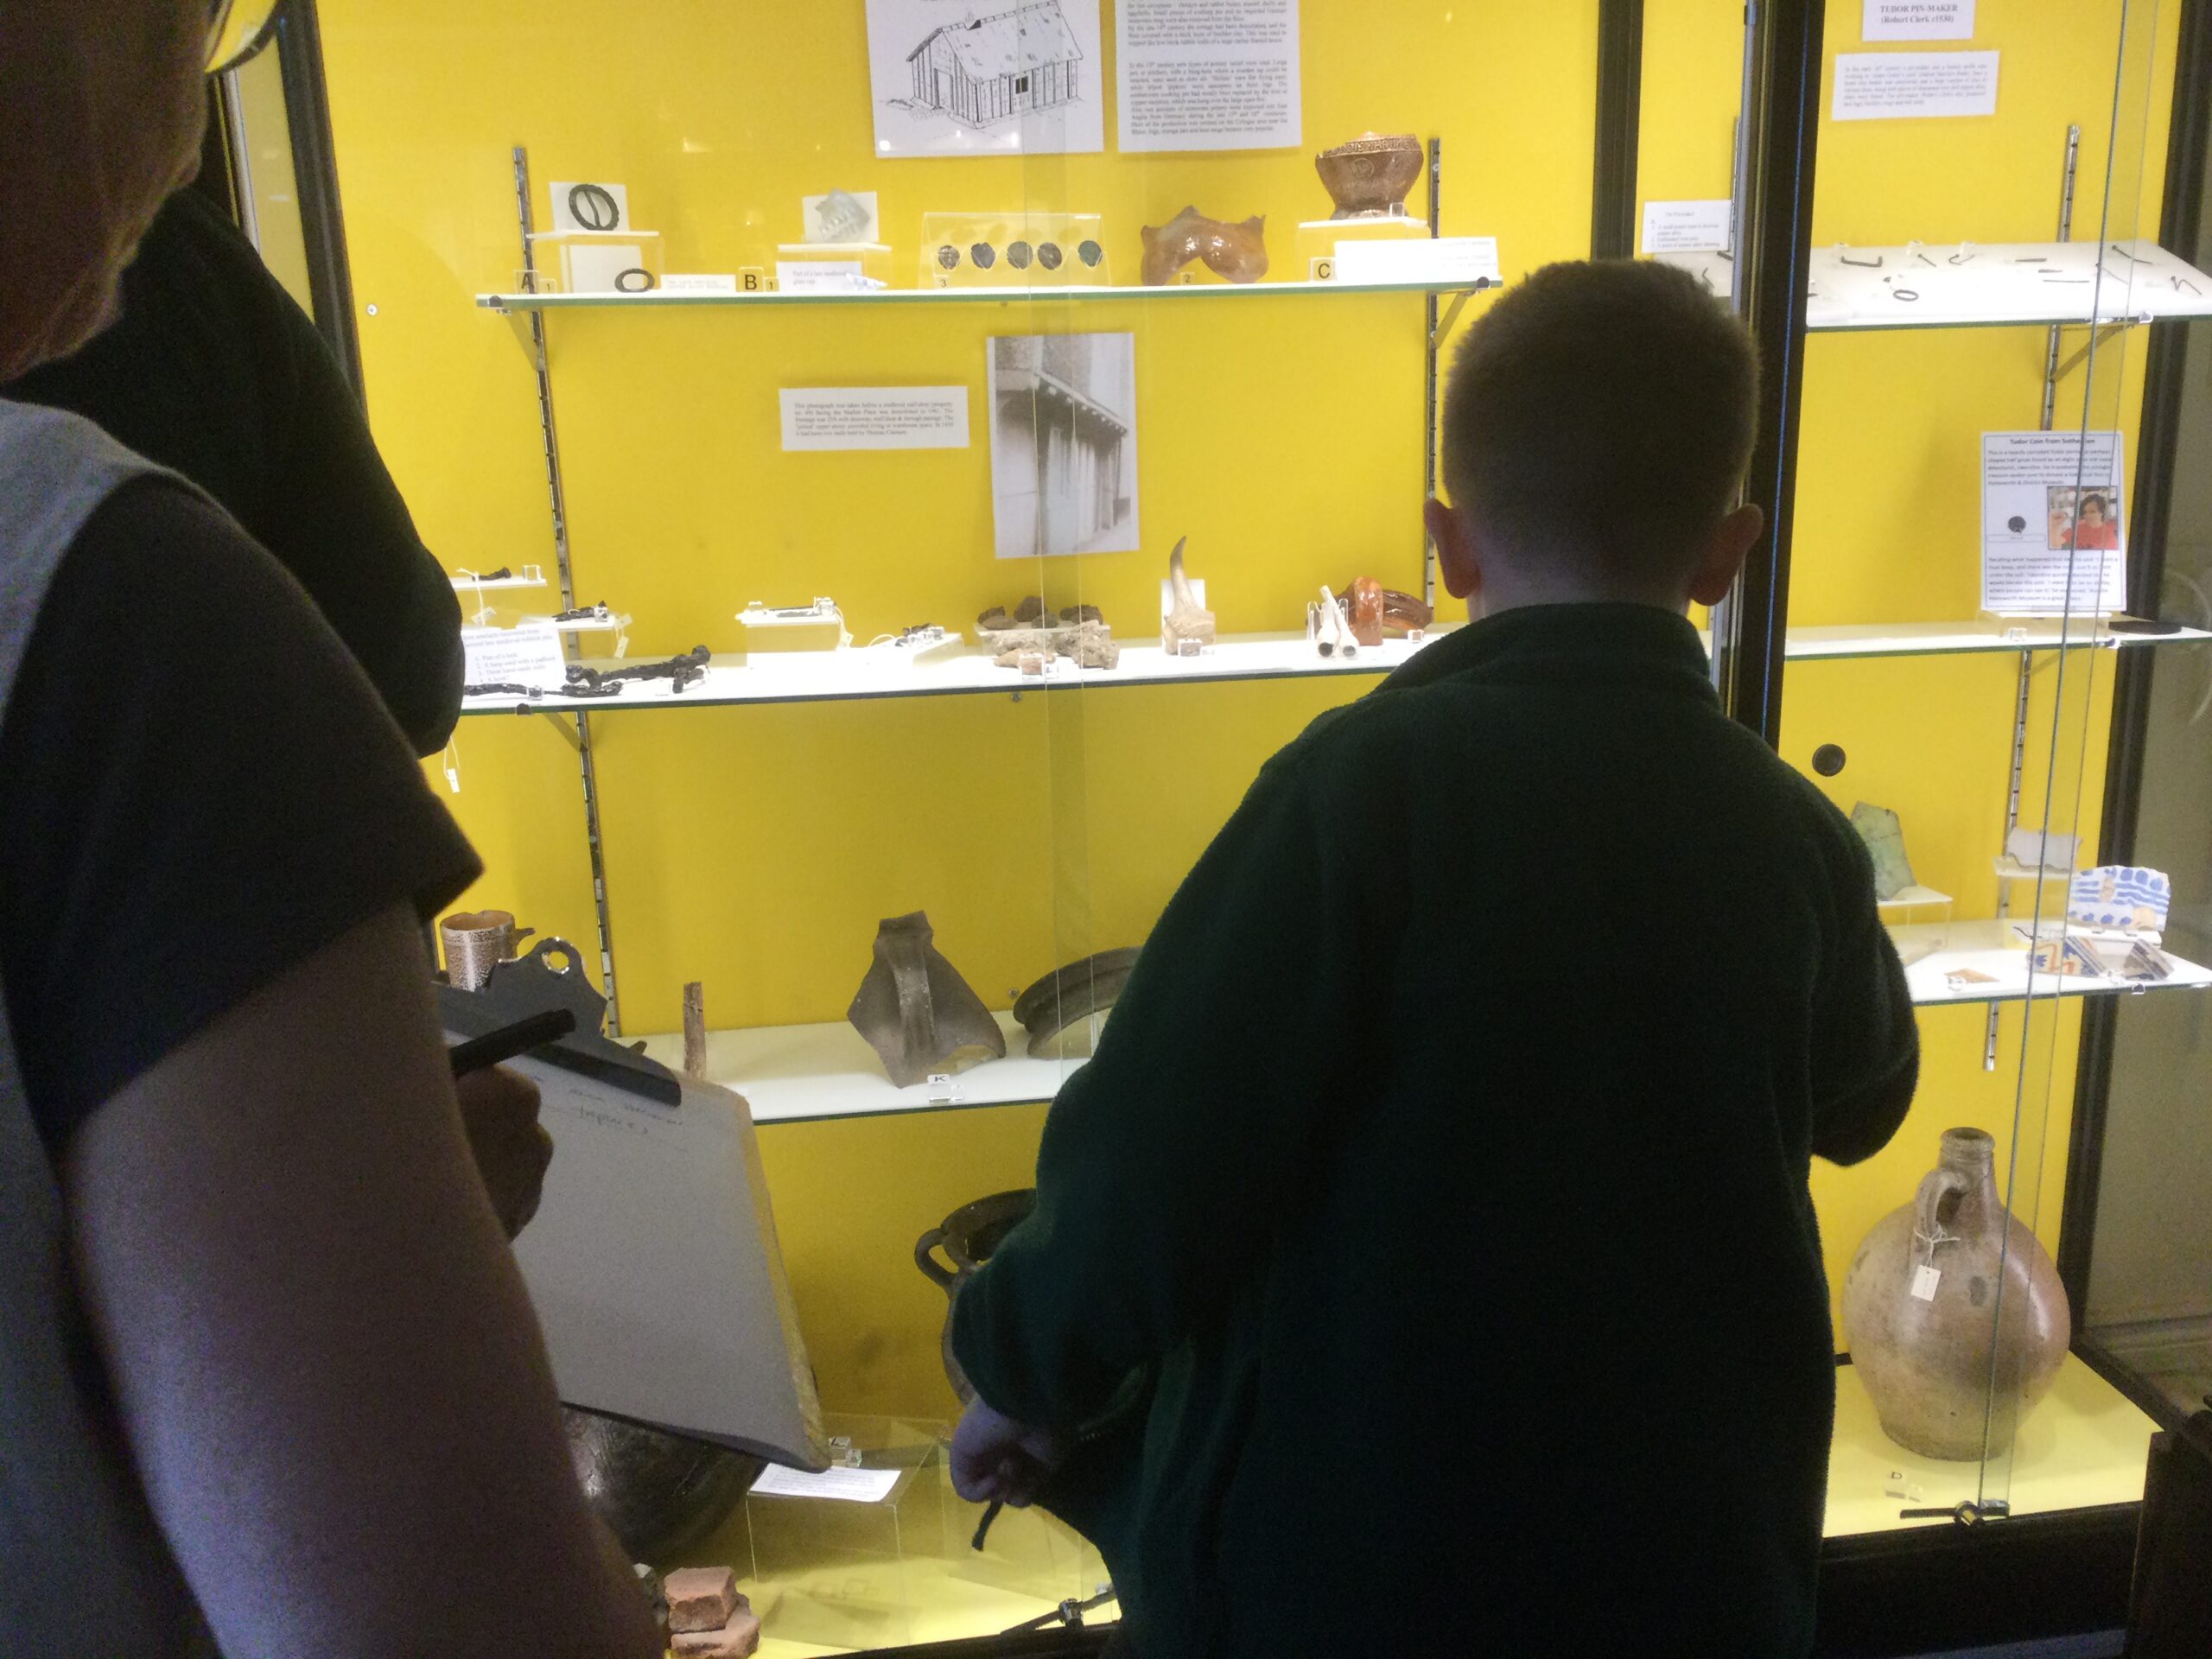 Children look into a display cabinet, with yellow background, containing pottery and coins dating from 15th century